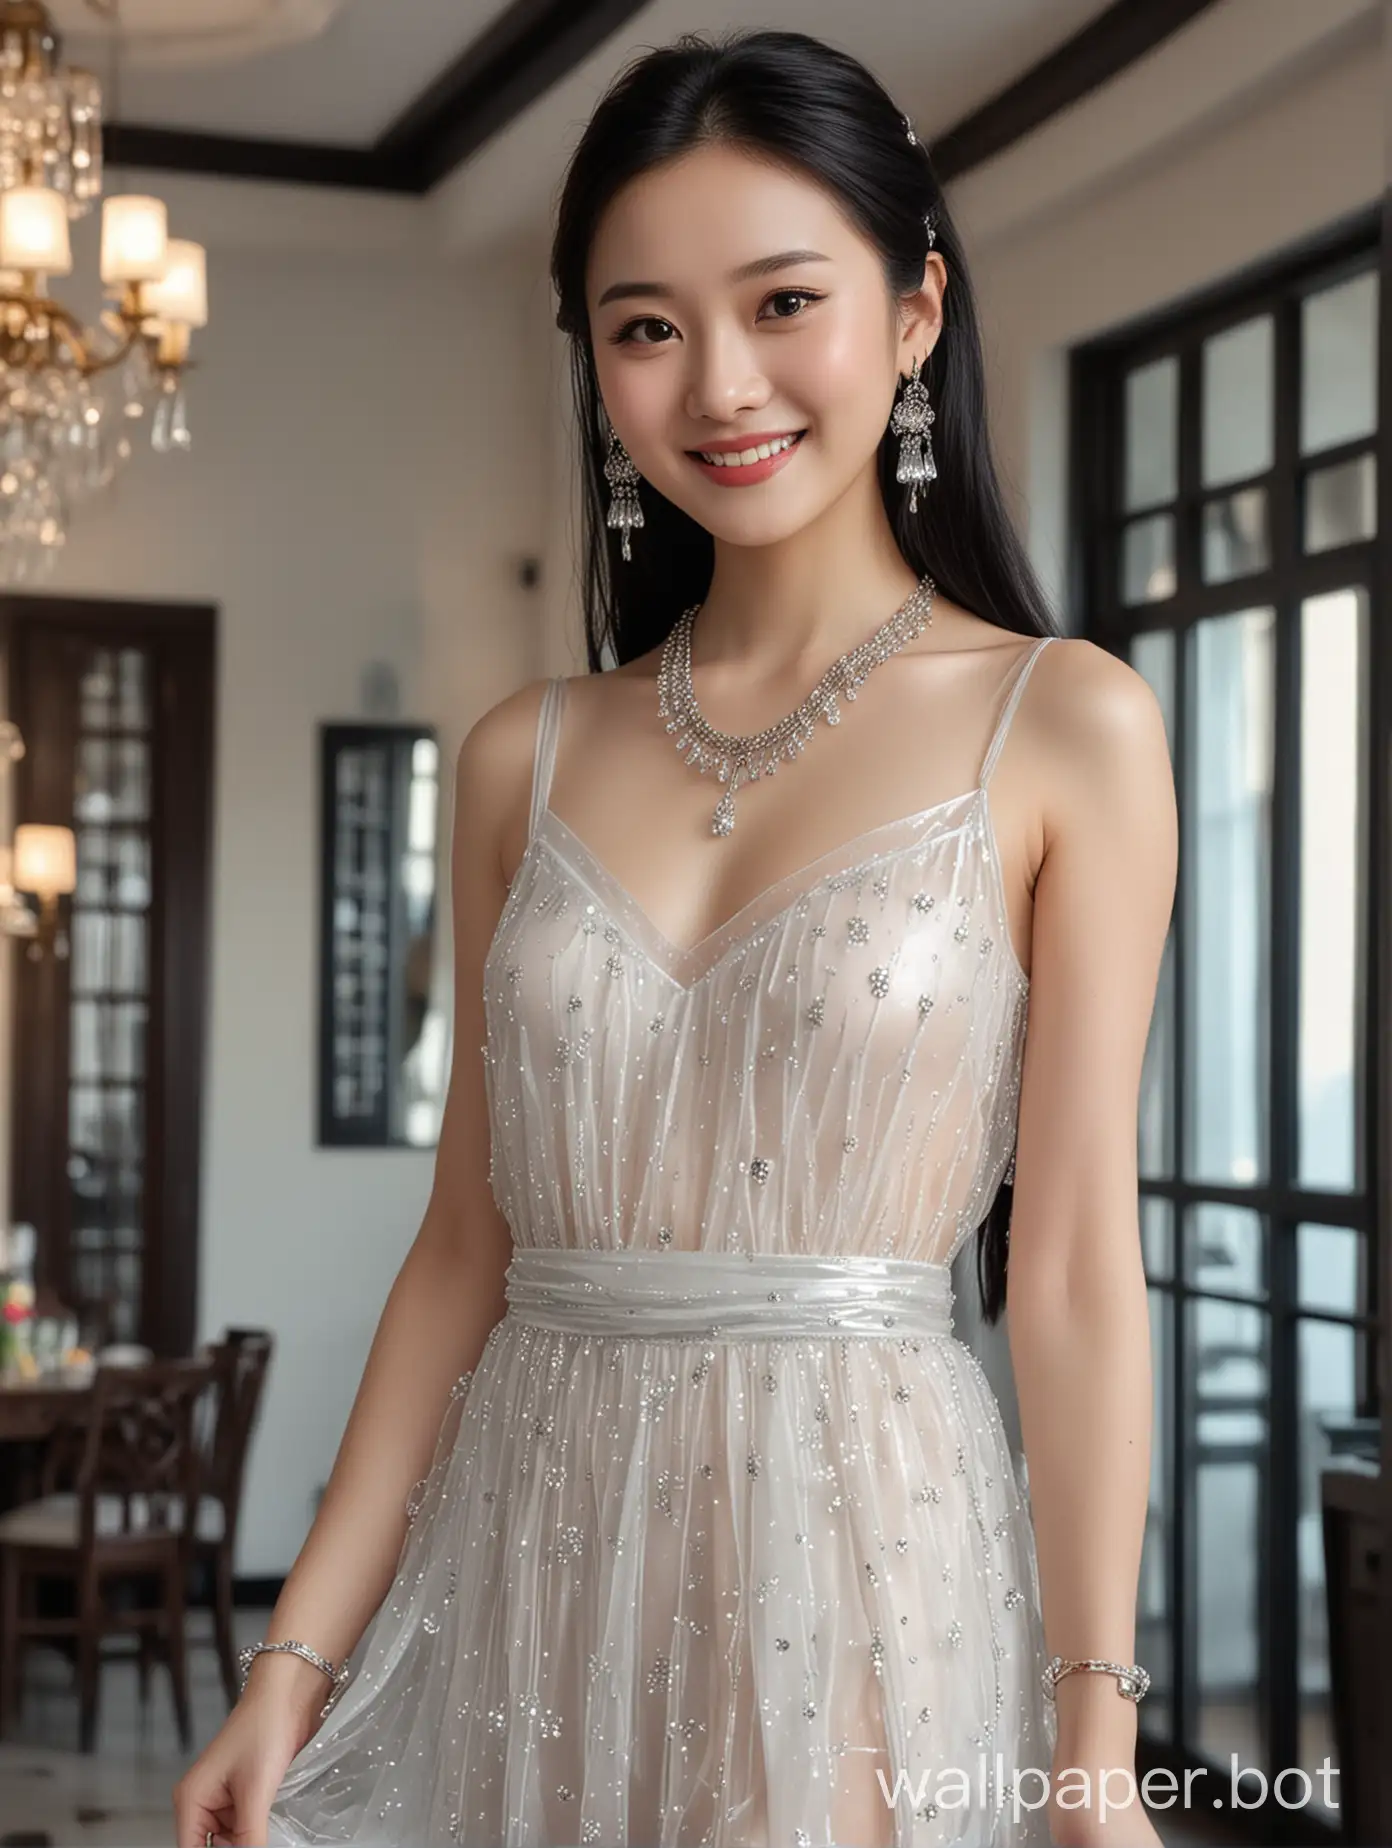 Generate an image of the most beautiful Chinese actress, a cute and pretty girl, wearing a translucent party dress, with fair skin and long black hair. She has a round face smile. The background is a modern interior house. The camera captures her from head to toe. She is made up, wearing necklaces, earrings and bracelets.